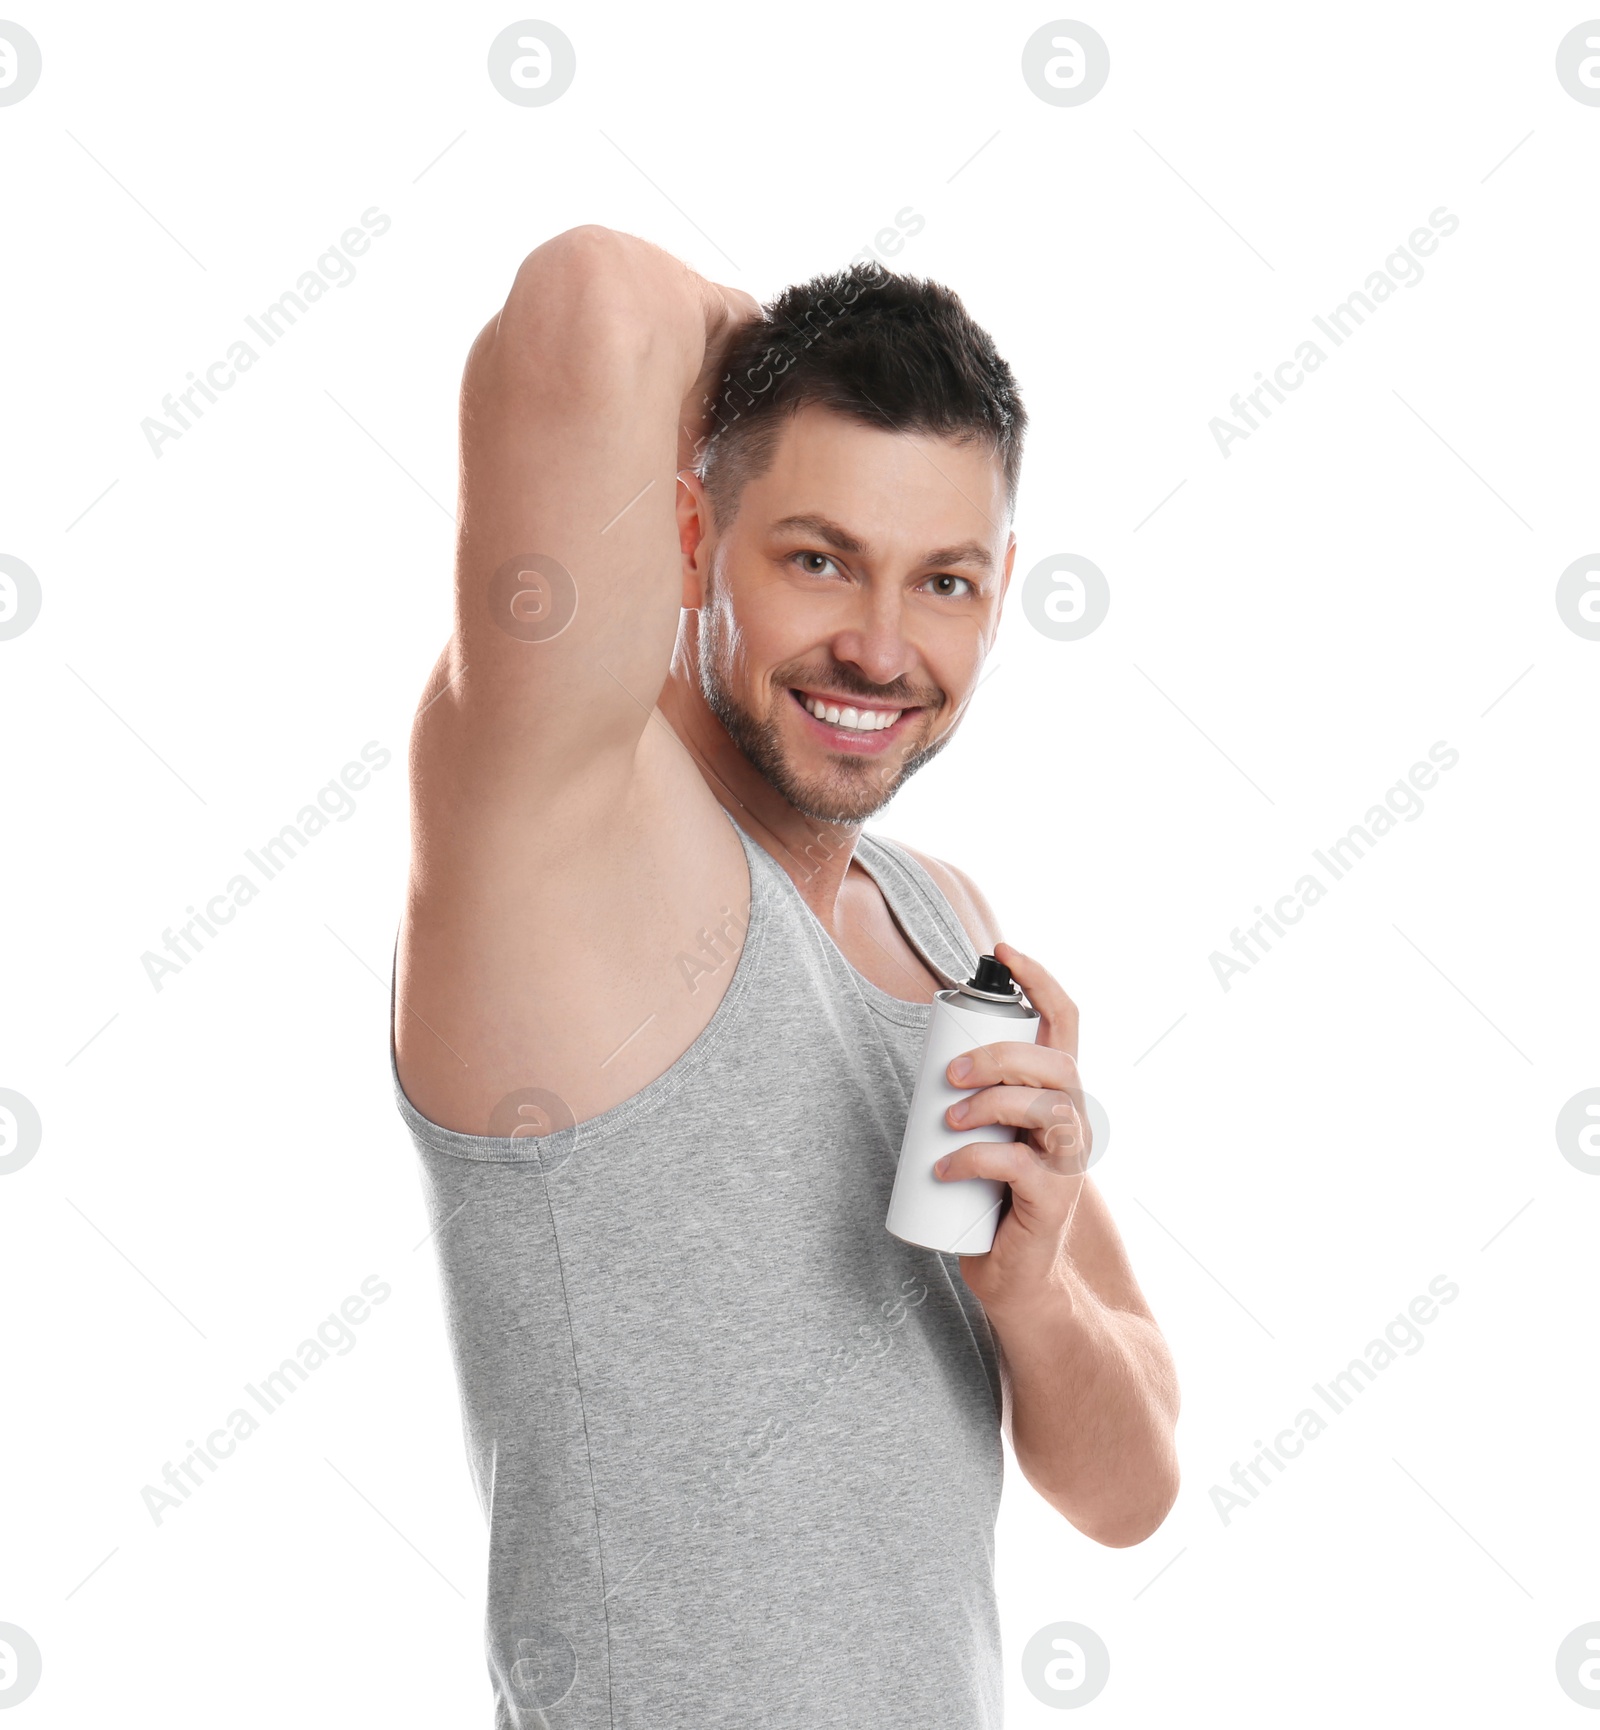 Photo of Handsome man applying deodorant isolated on white